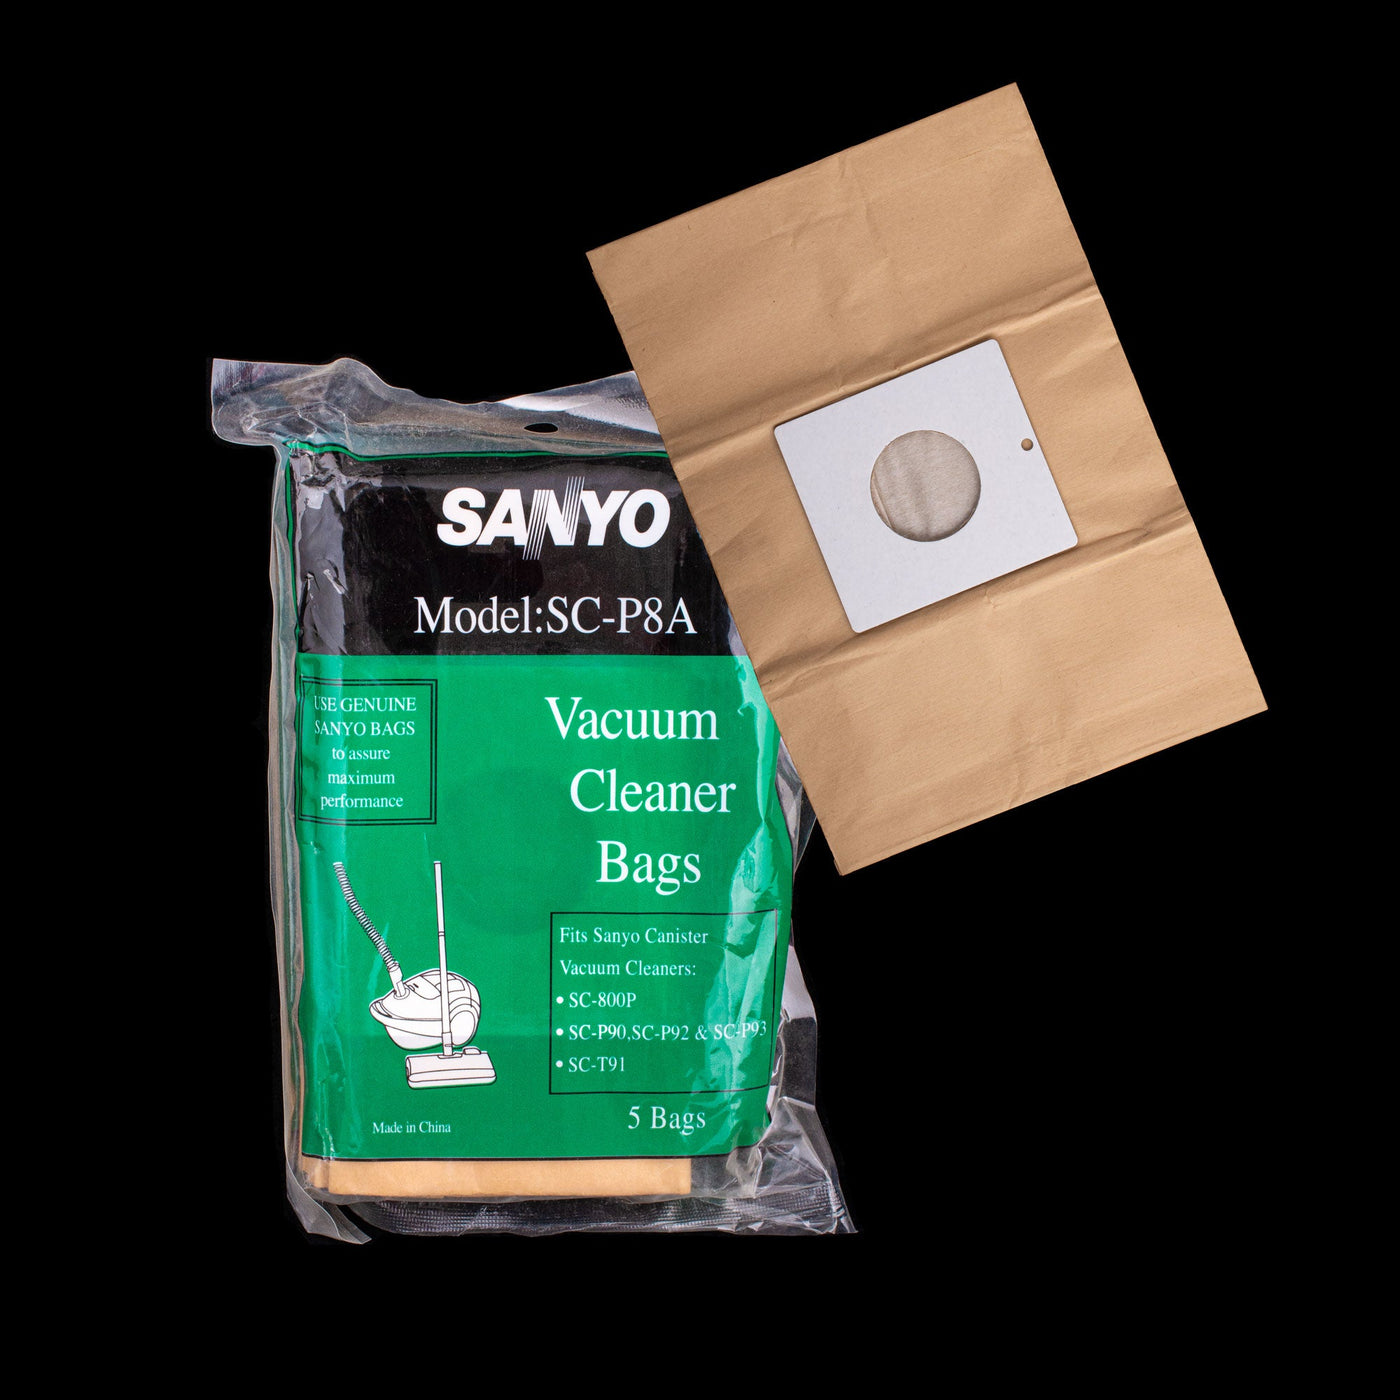 Sanyo SC-P8A Vacuum Cleaner Bags (5 Pack)